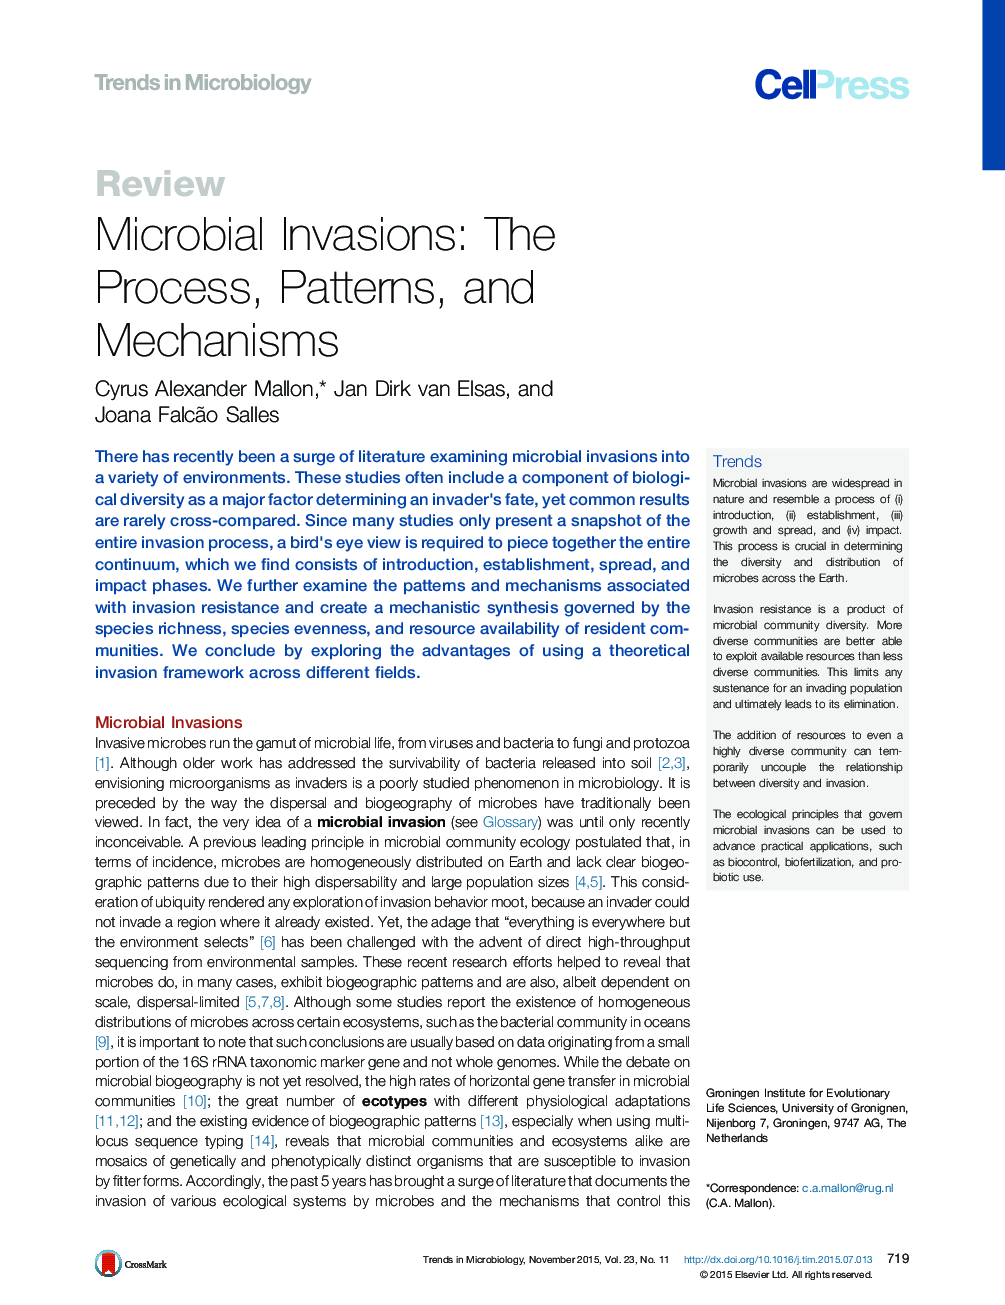 Microbial Invasions: The Process, Patterns, and Mechanisms